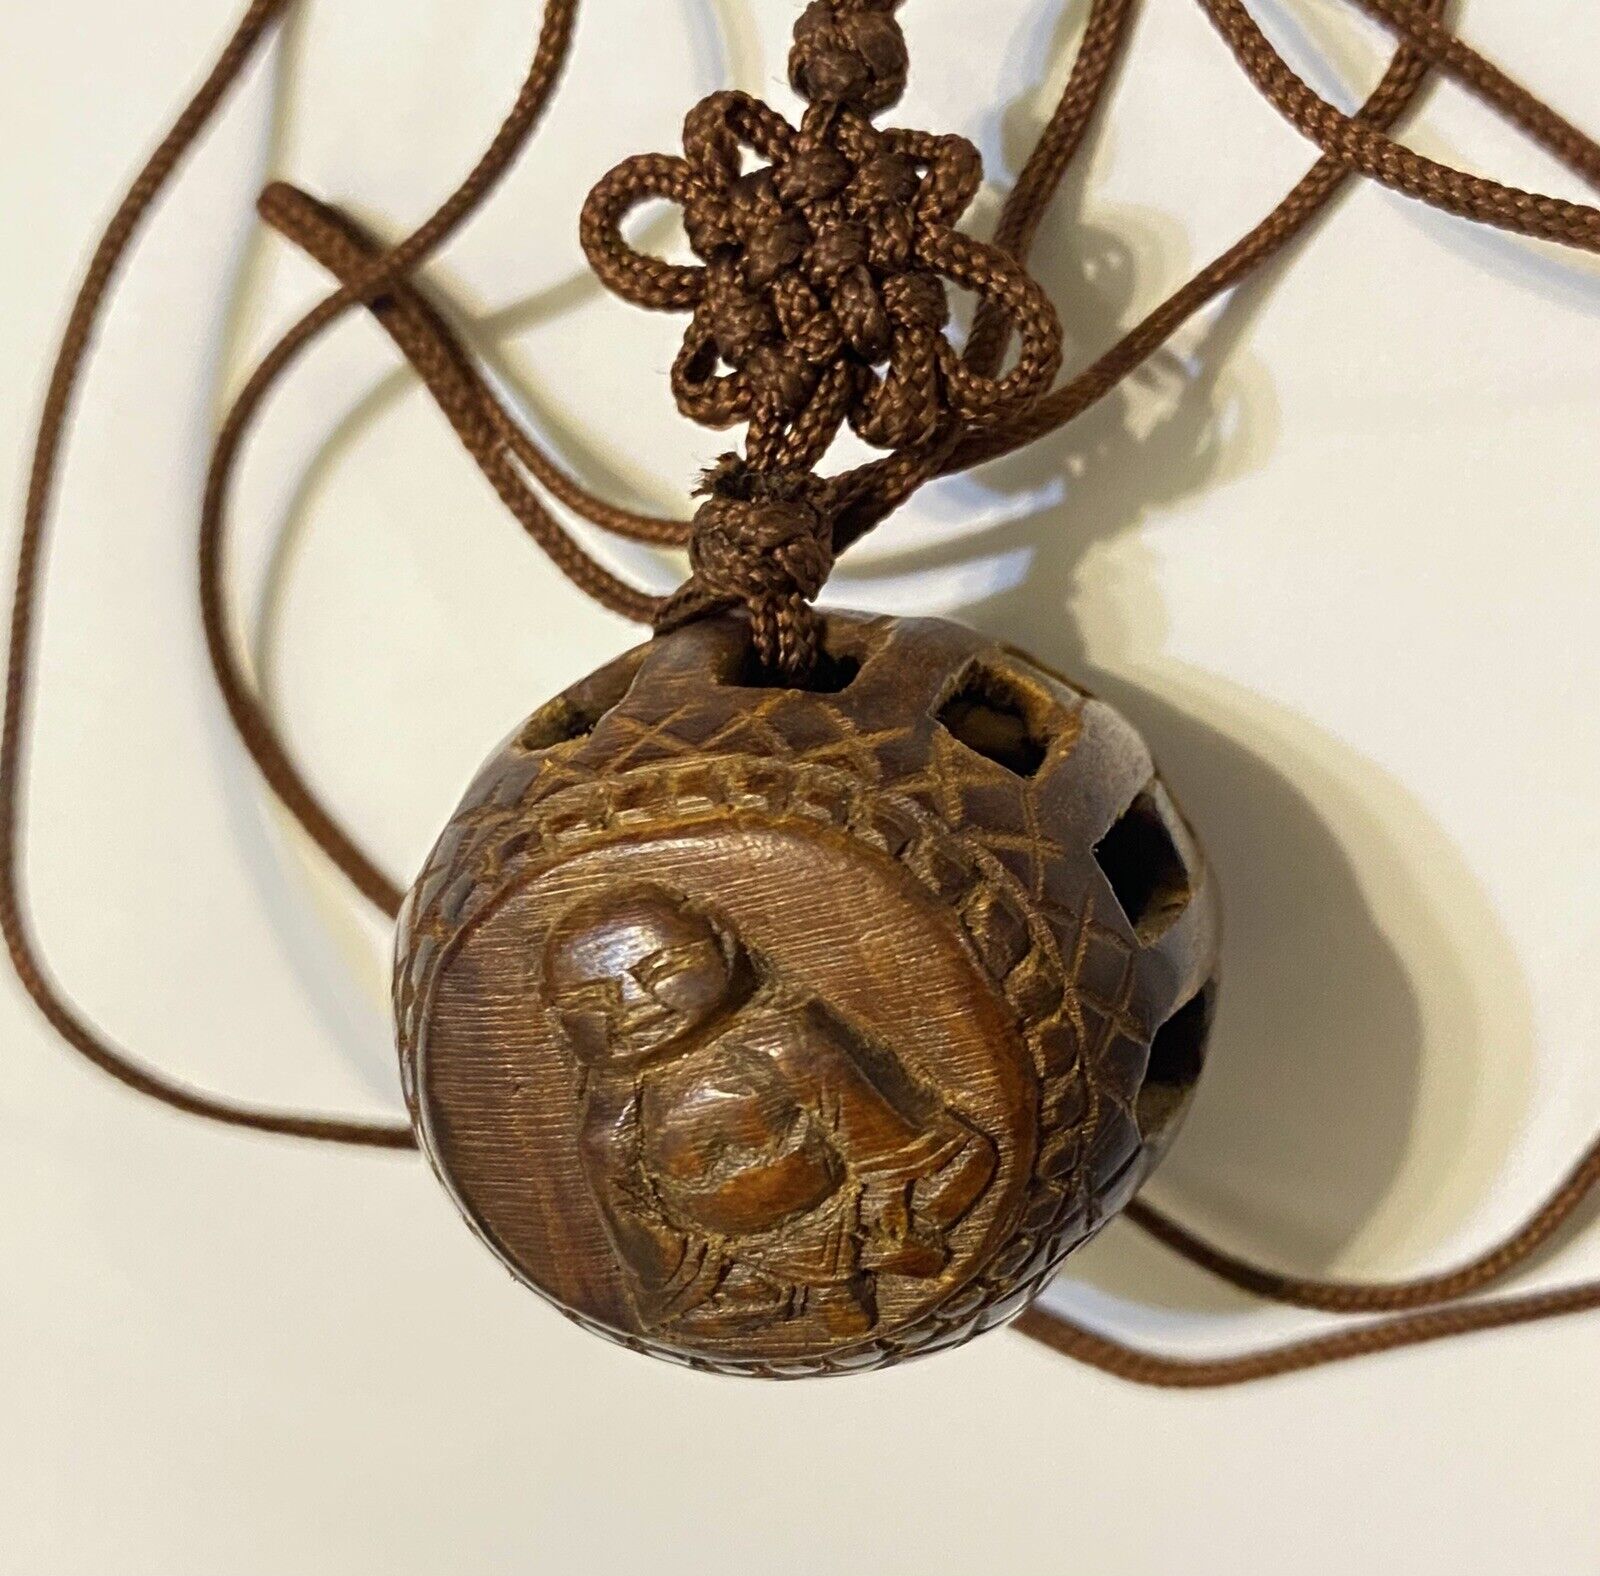 14 In Chinese Wood Buddha Carving Necklace - Vintage - Rare